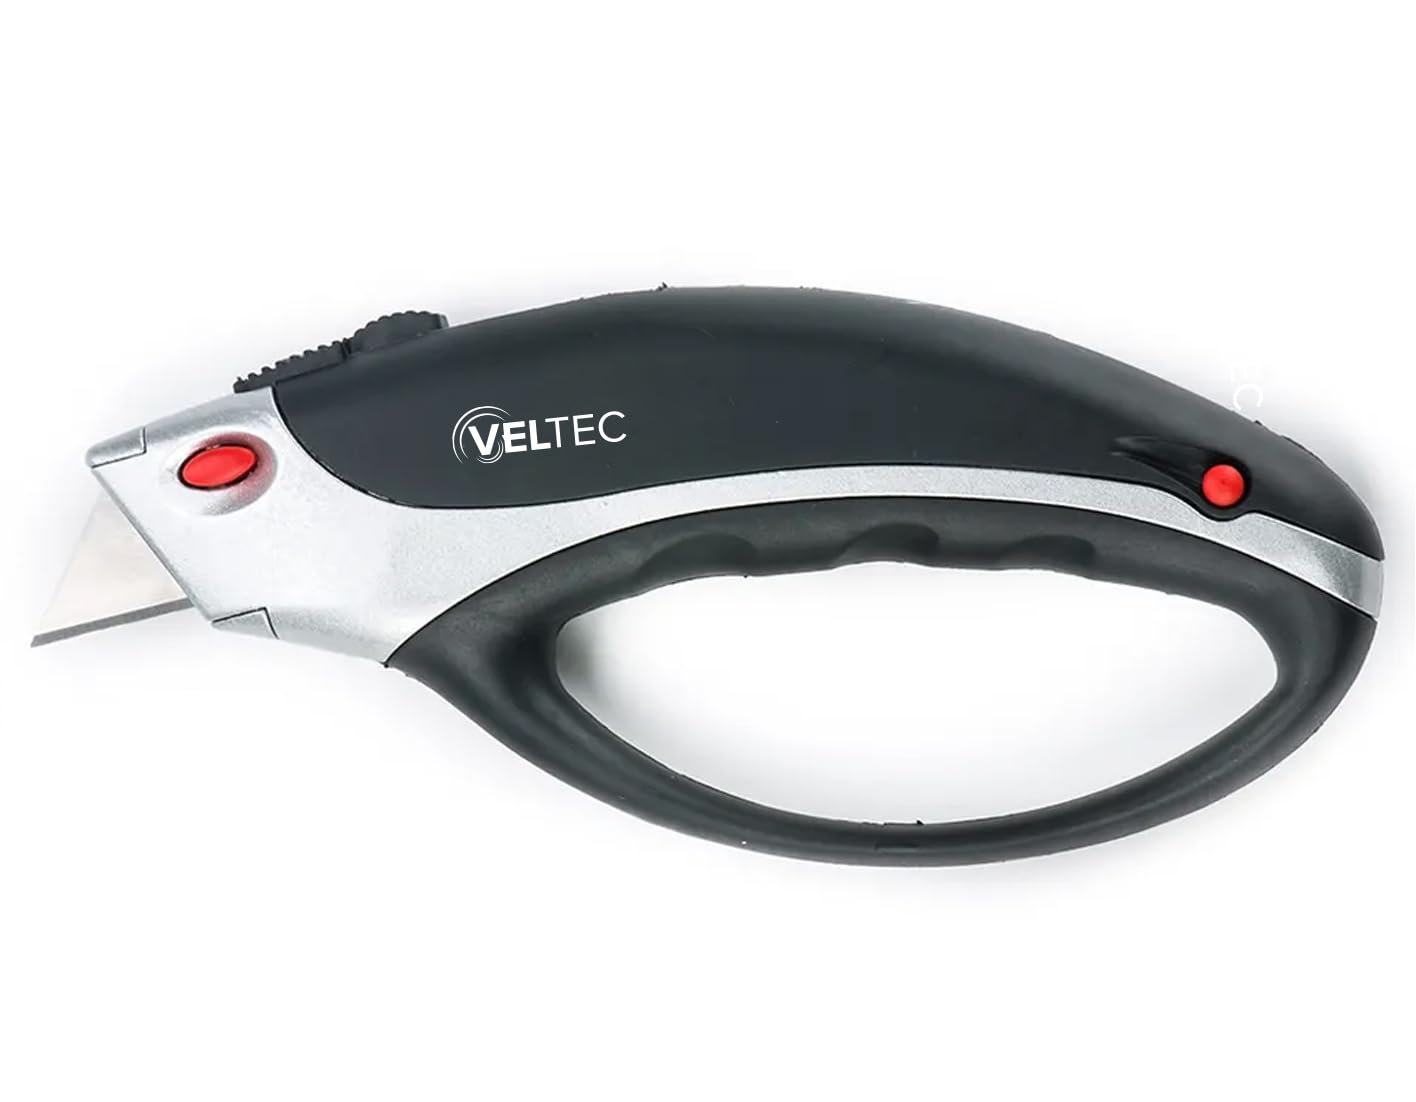 Veltec Heavy Duty Retractable Utility Knife, Box Cutter, Carpet Cutter with 3-Position Locking, Ergonomic Non-Slip Grip, 5 Reversible Replacements Blades SK5 (Black)